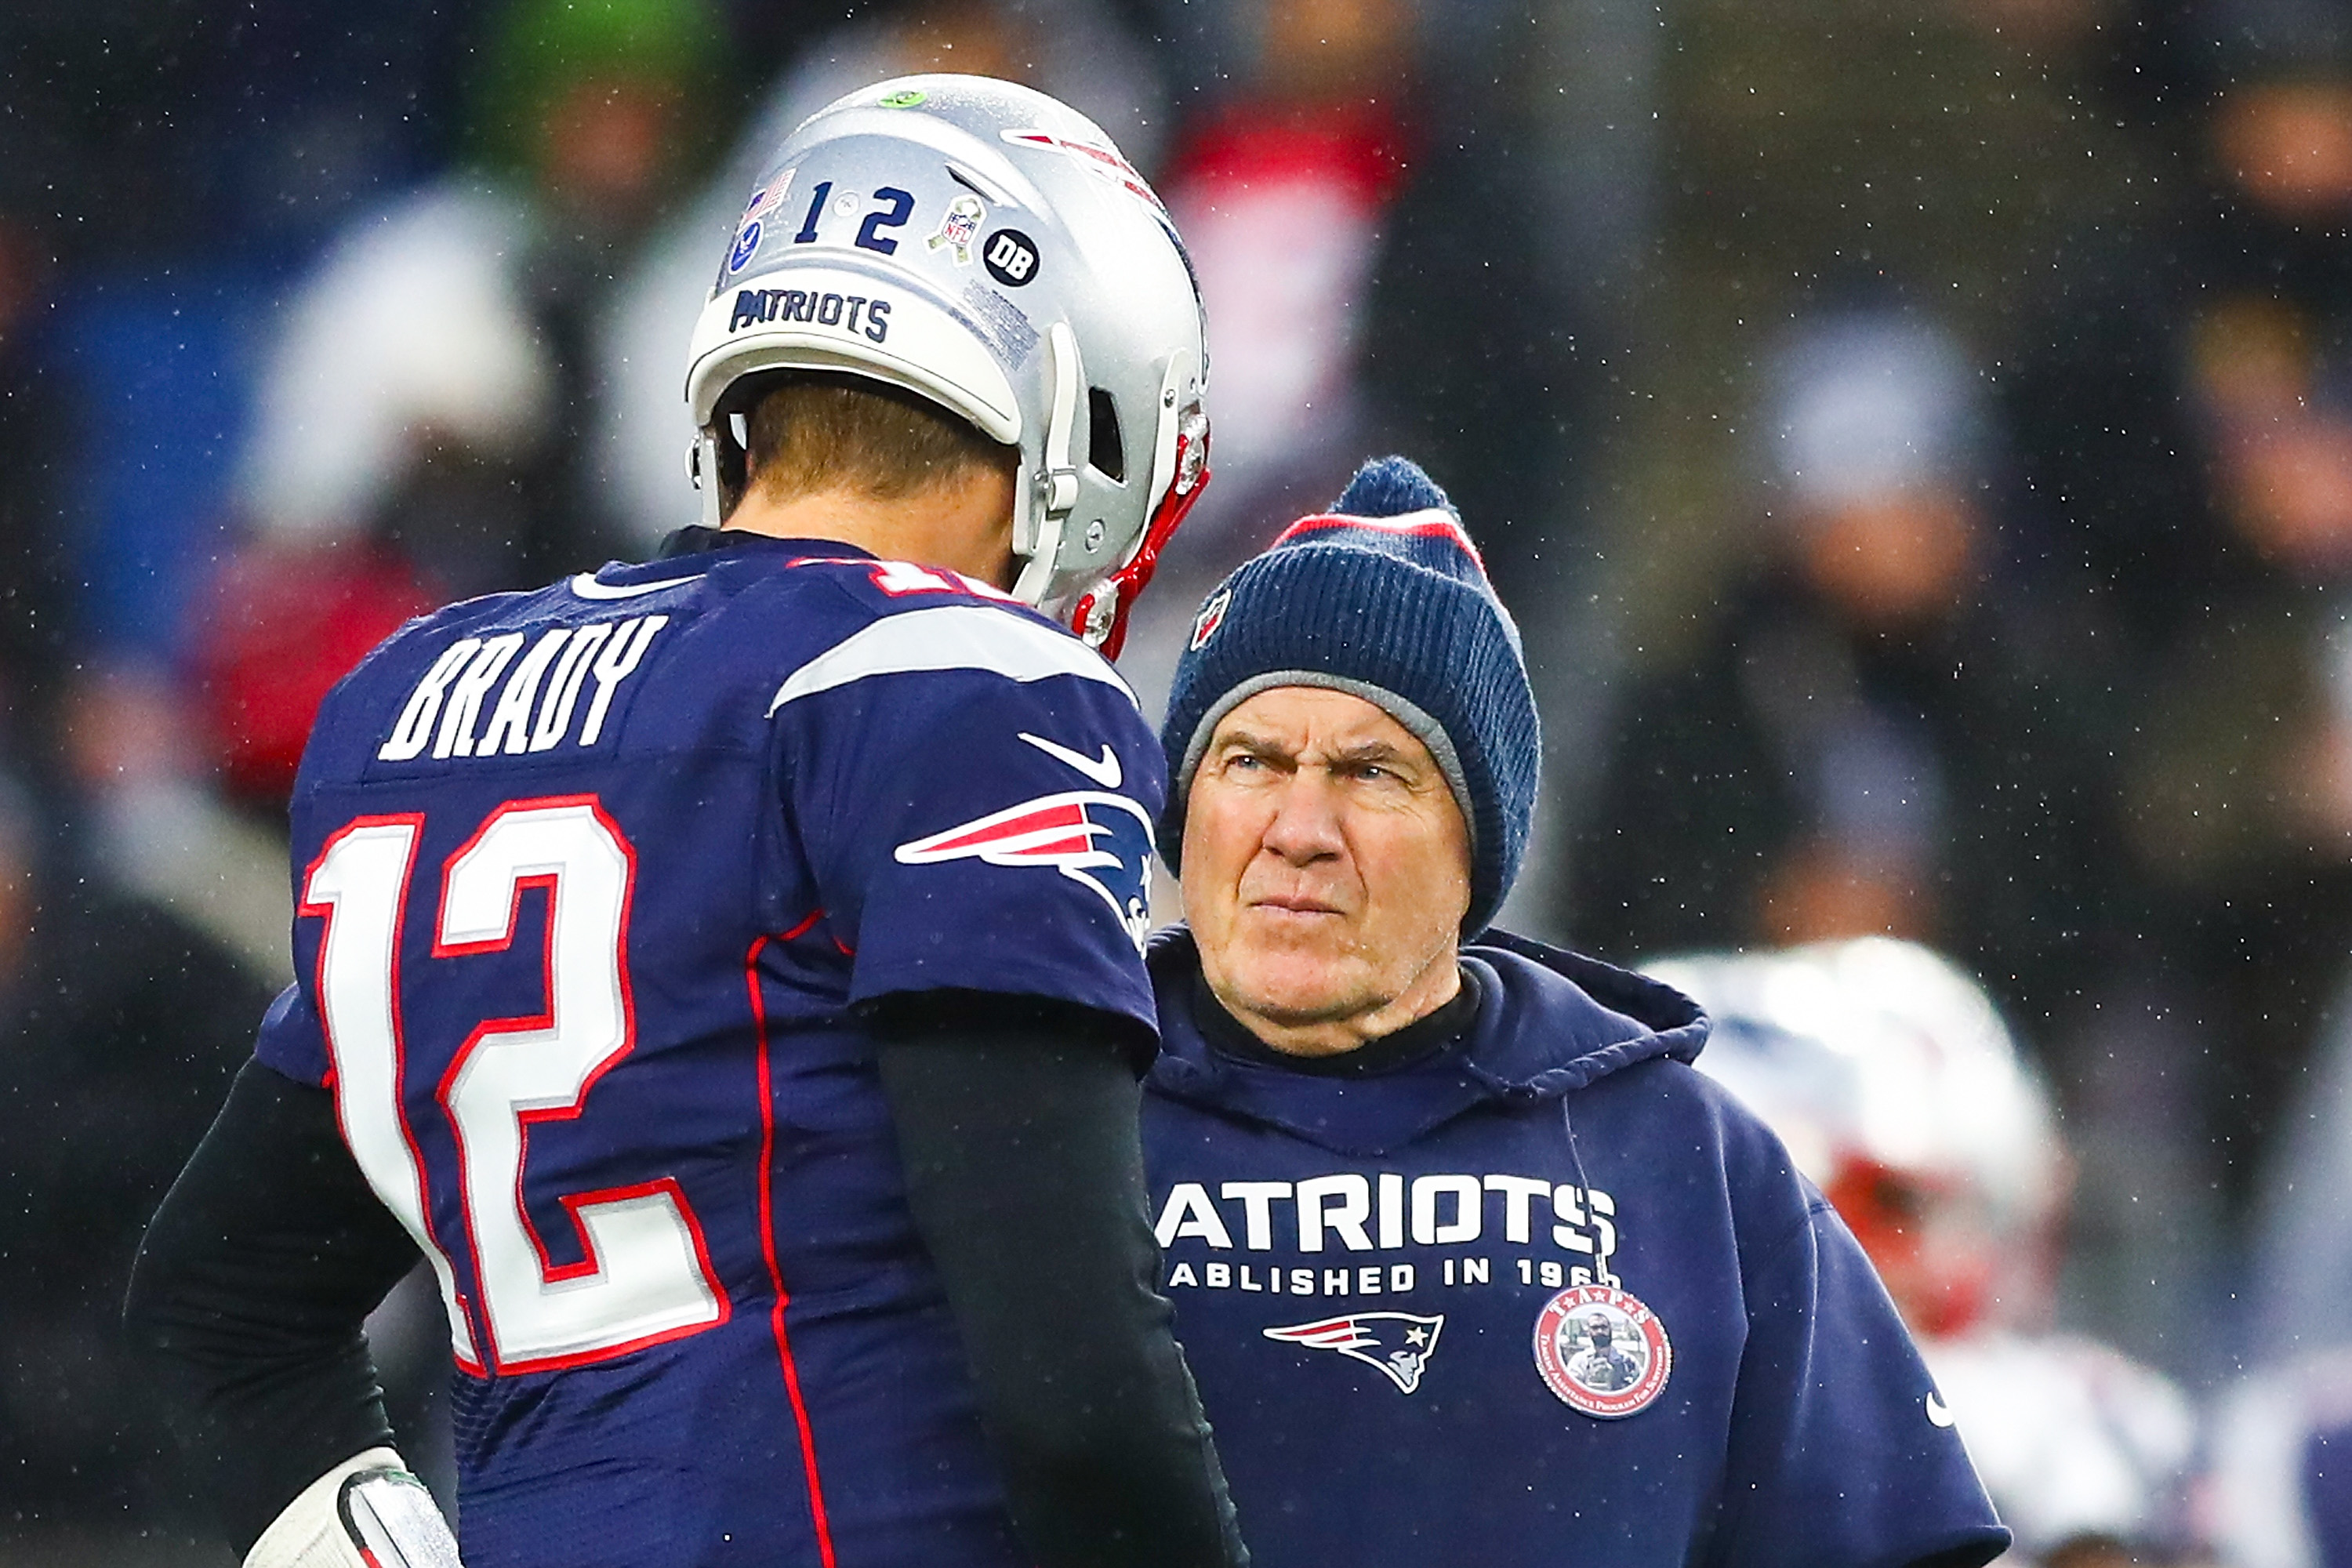 Quarterback Tom Brady talks to head coach Bill Belichick of the New England Patriots before a game against the Dallas Cowboys at Gillette Stadium on November 24, 2019 in Foxborough, Massachusetts.